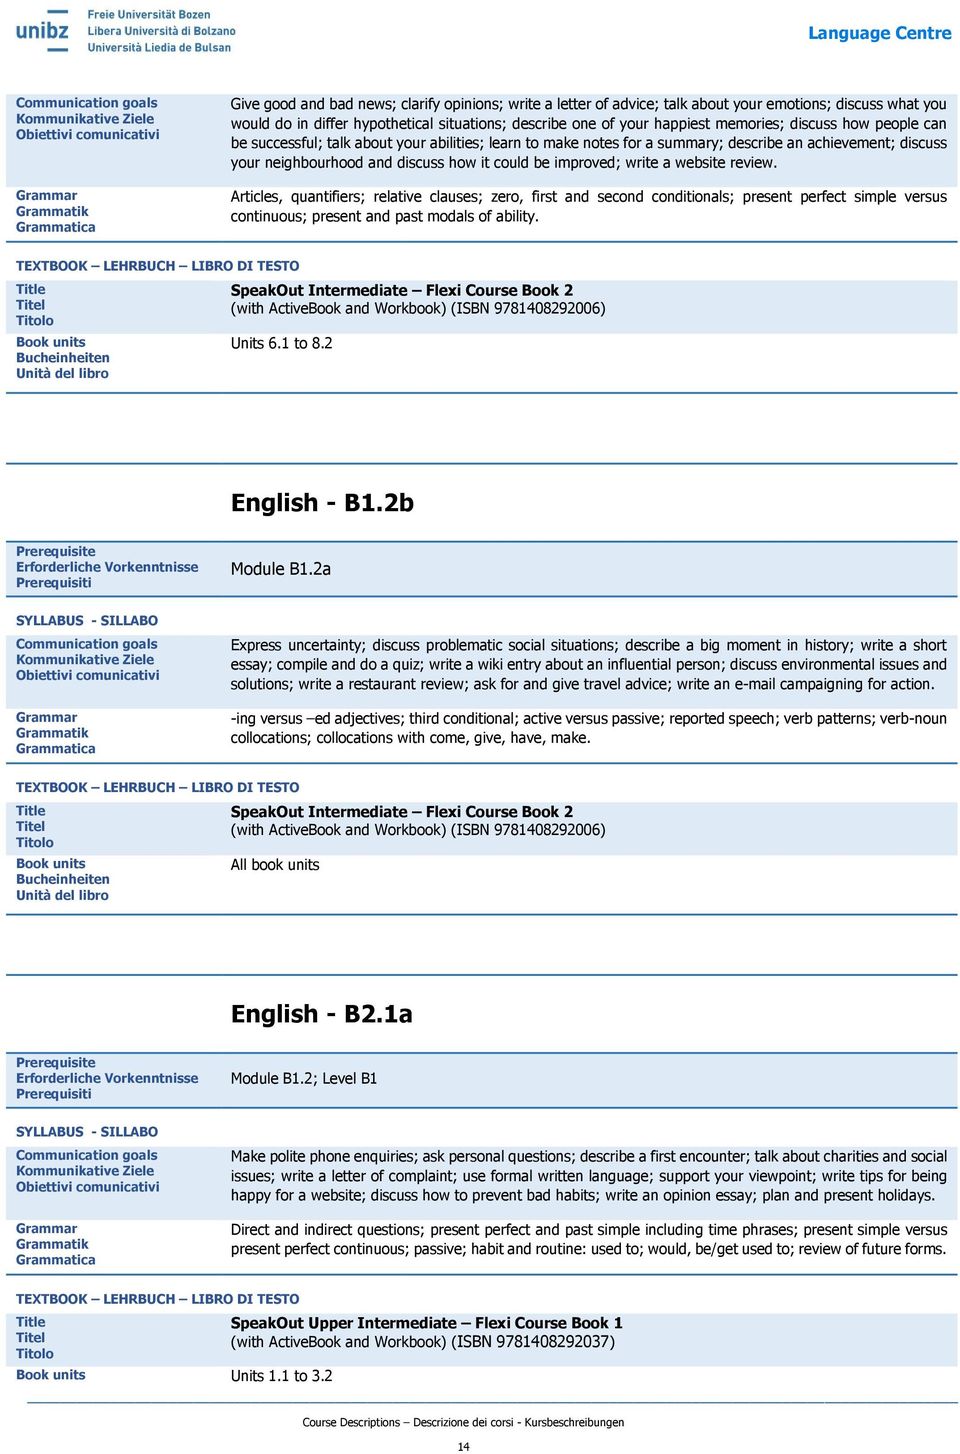 website review. Articles, quantifiers; relative clauses; zero, first and second conditionals; present perfect simple versus continuous; present and past modals of ability.